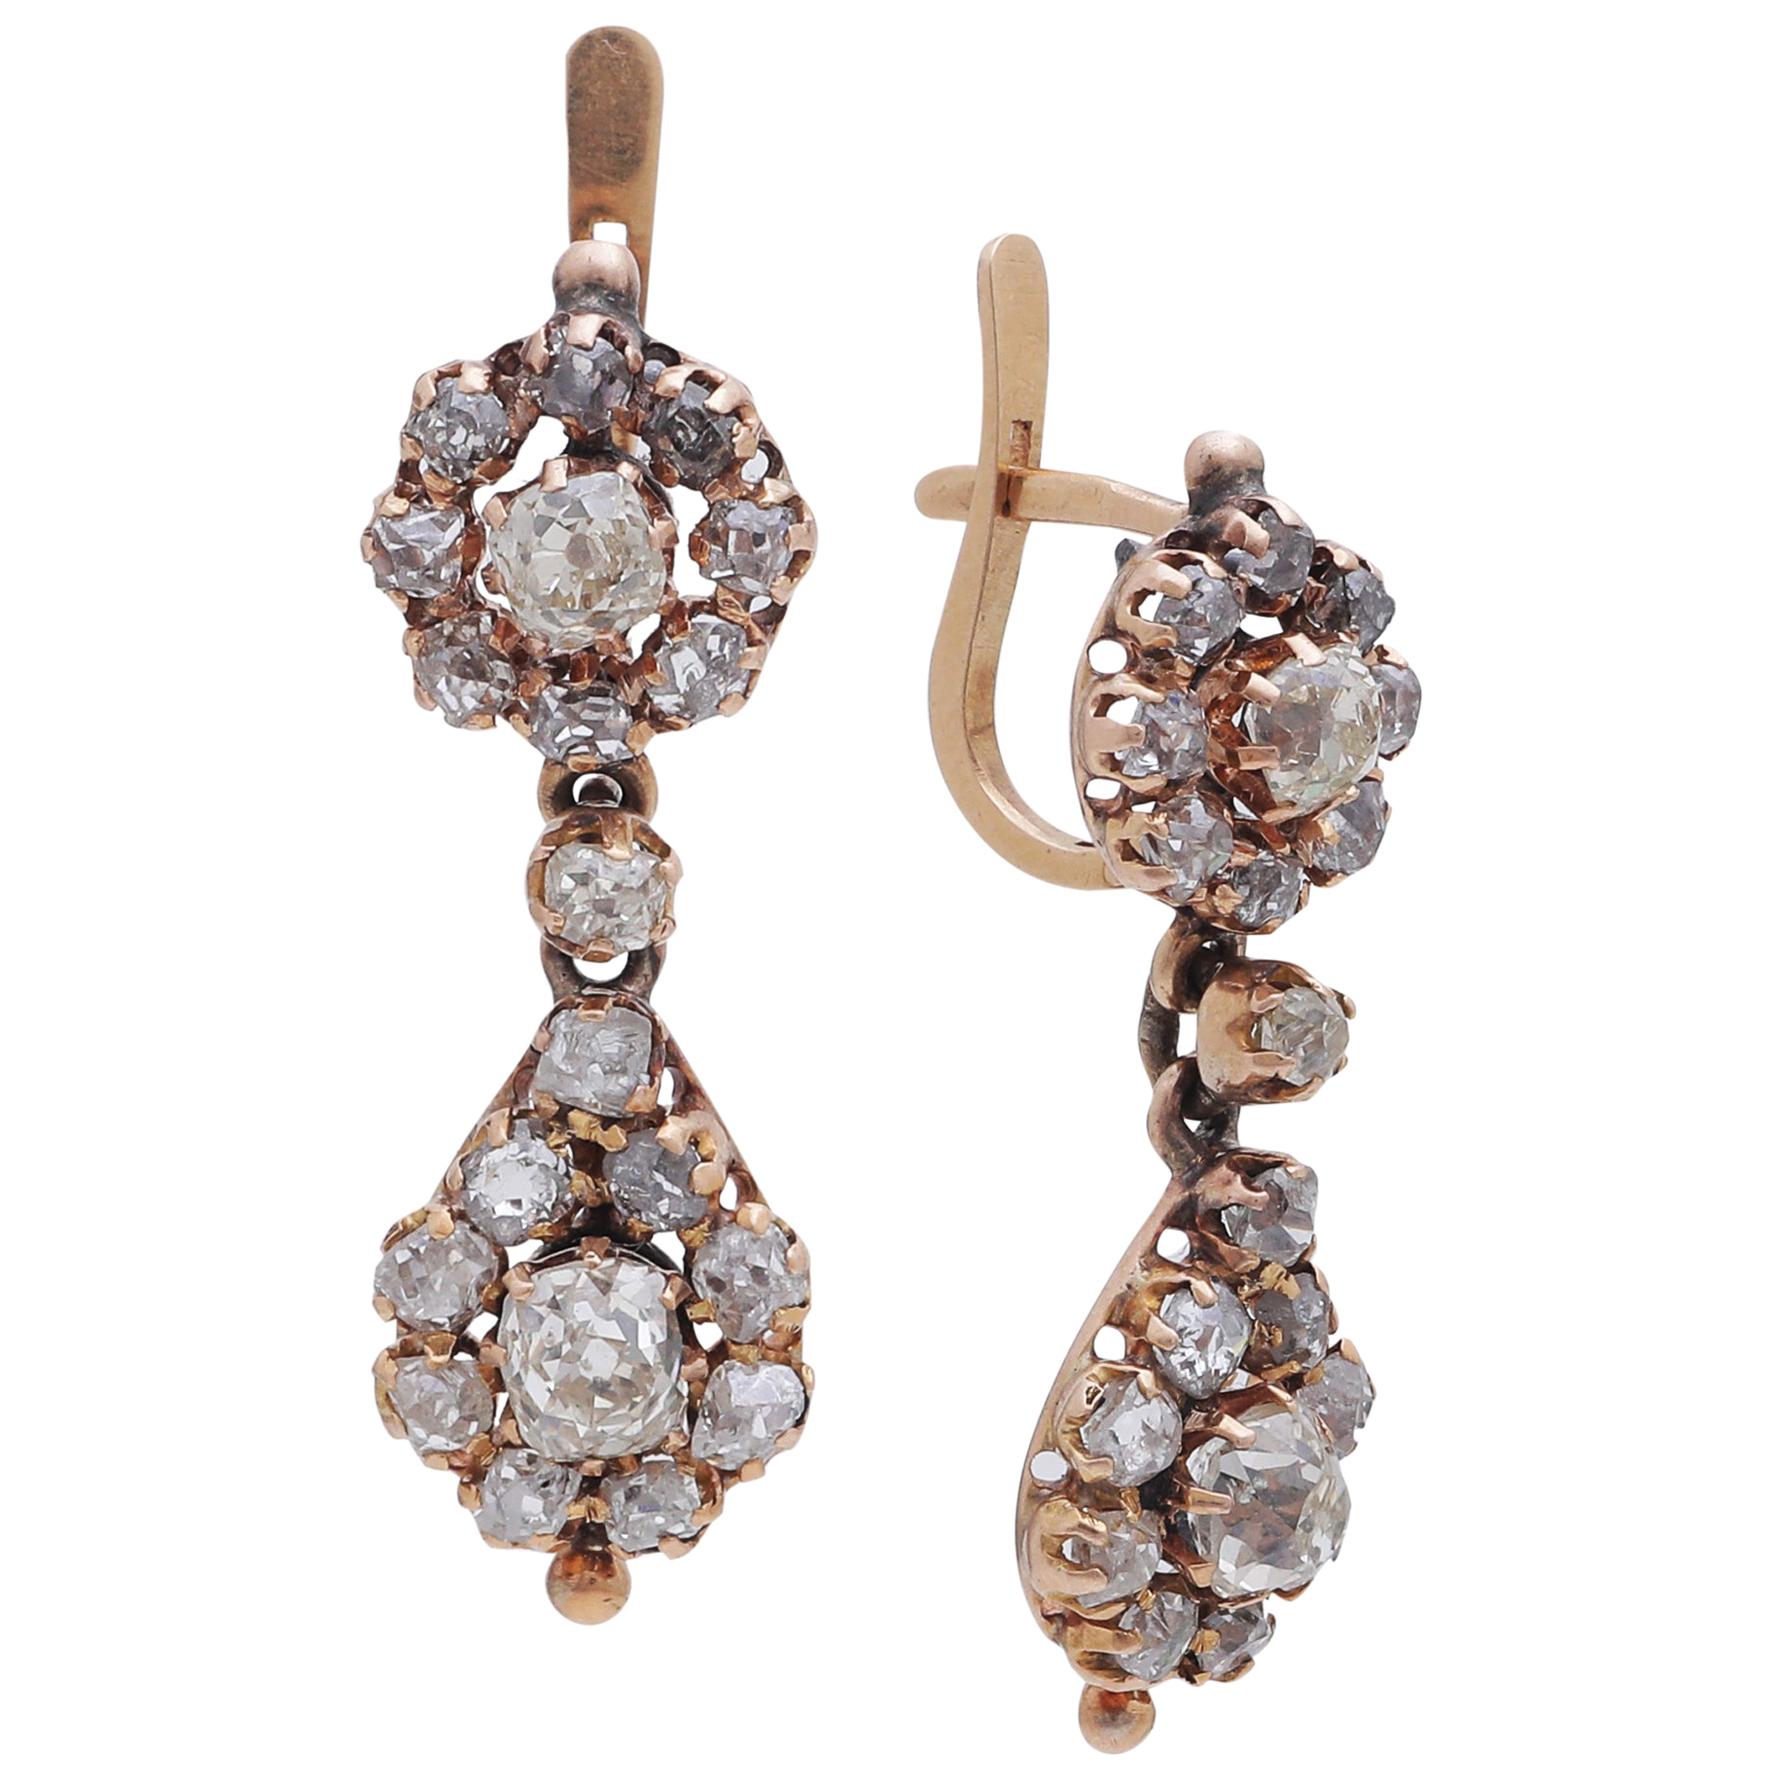 Vintage Old Cut Diamonds and Gold Earring Pair from a Private Collection